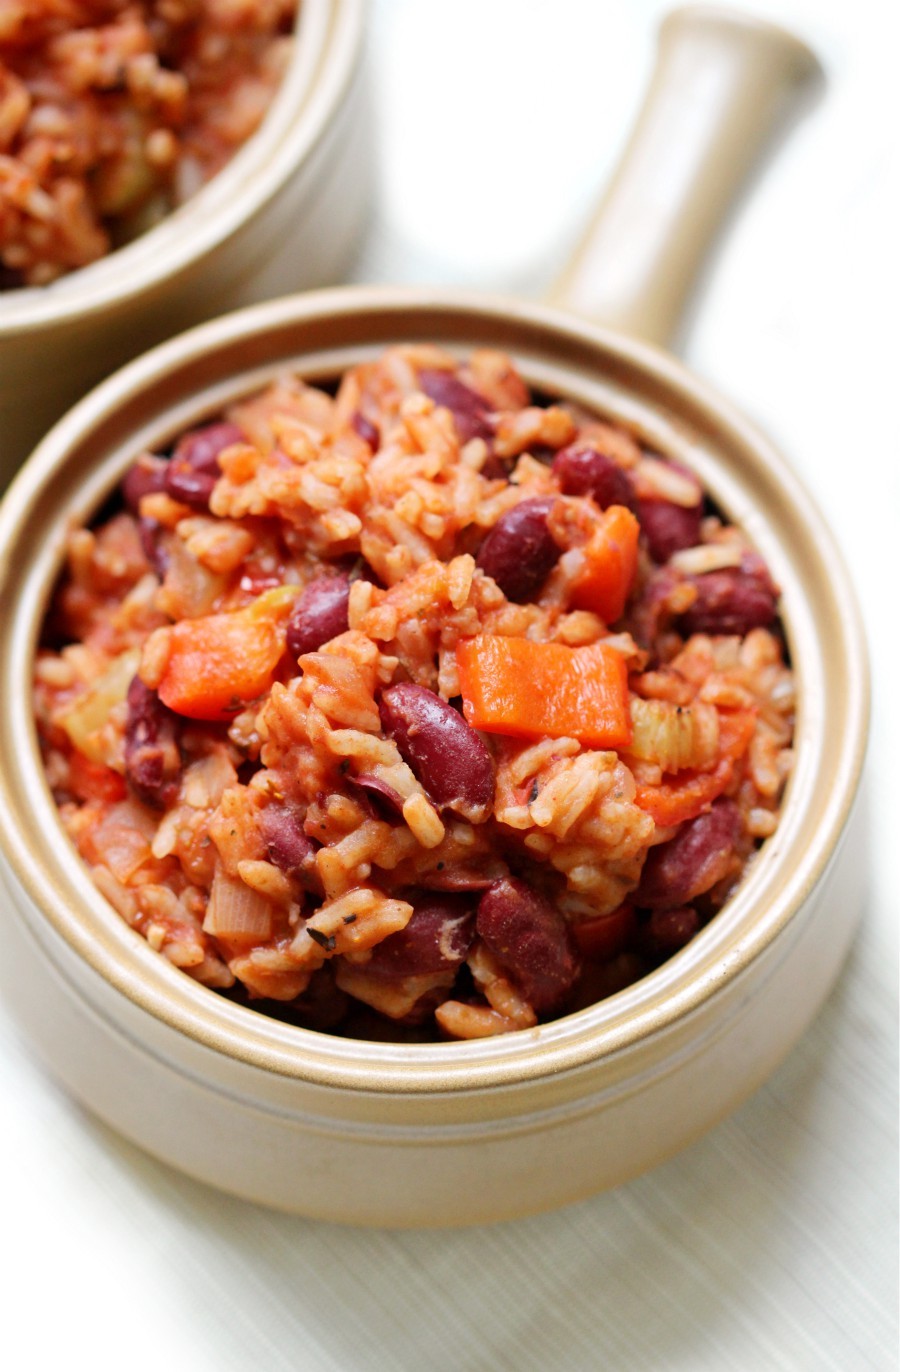 left-side-vegan-gluten-free-red-beans-and-rice-bowl